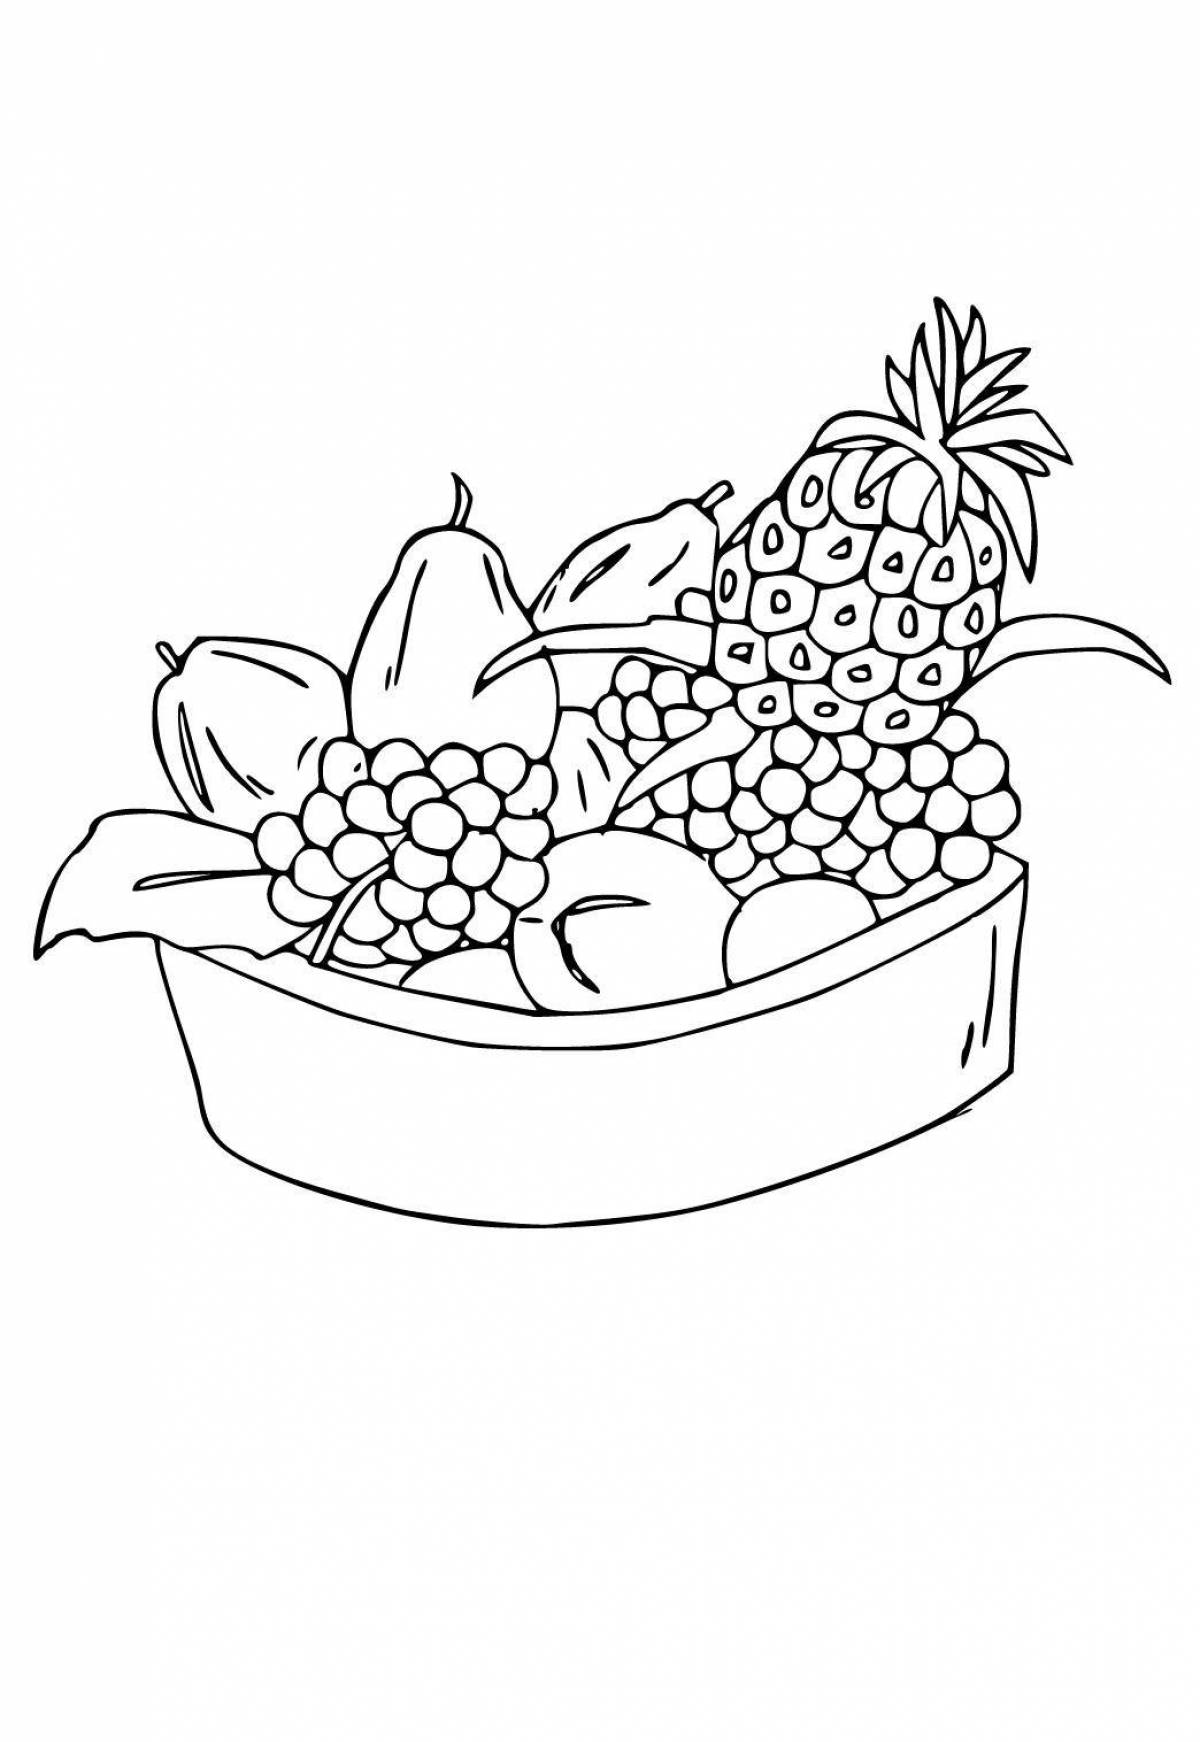 Living fruit salad coloring page for kids